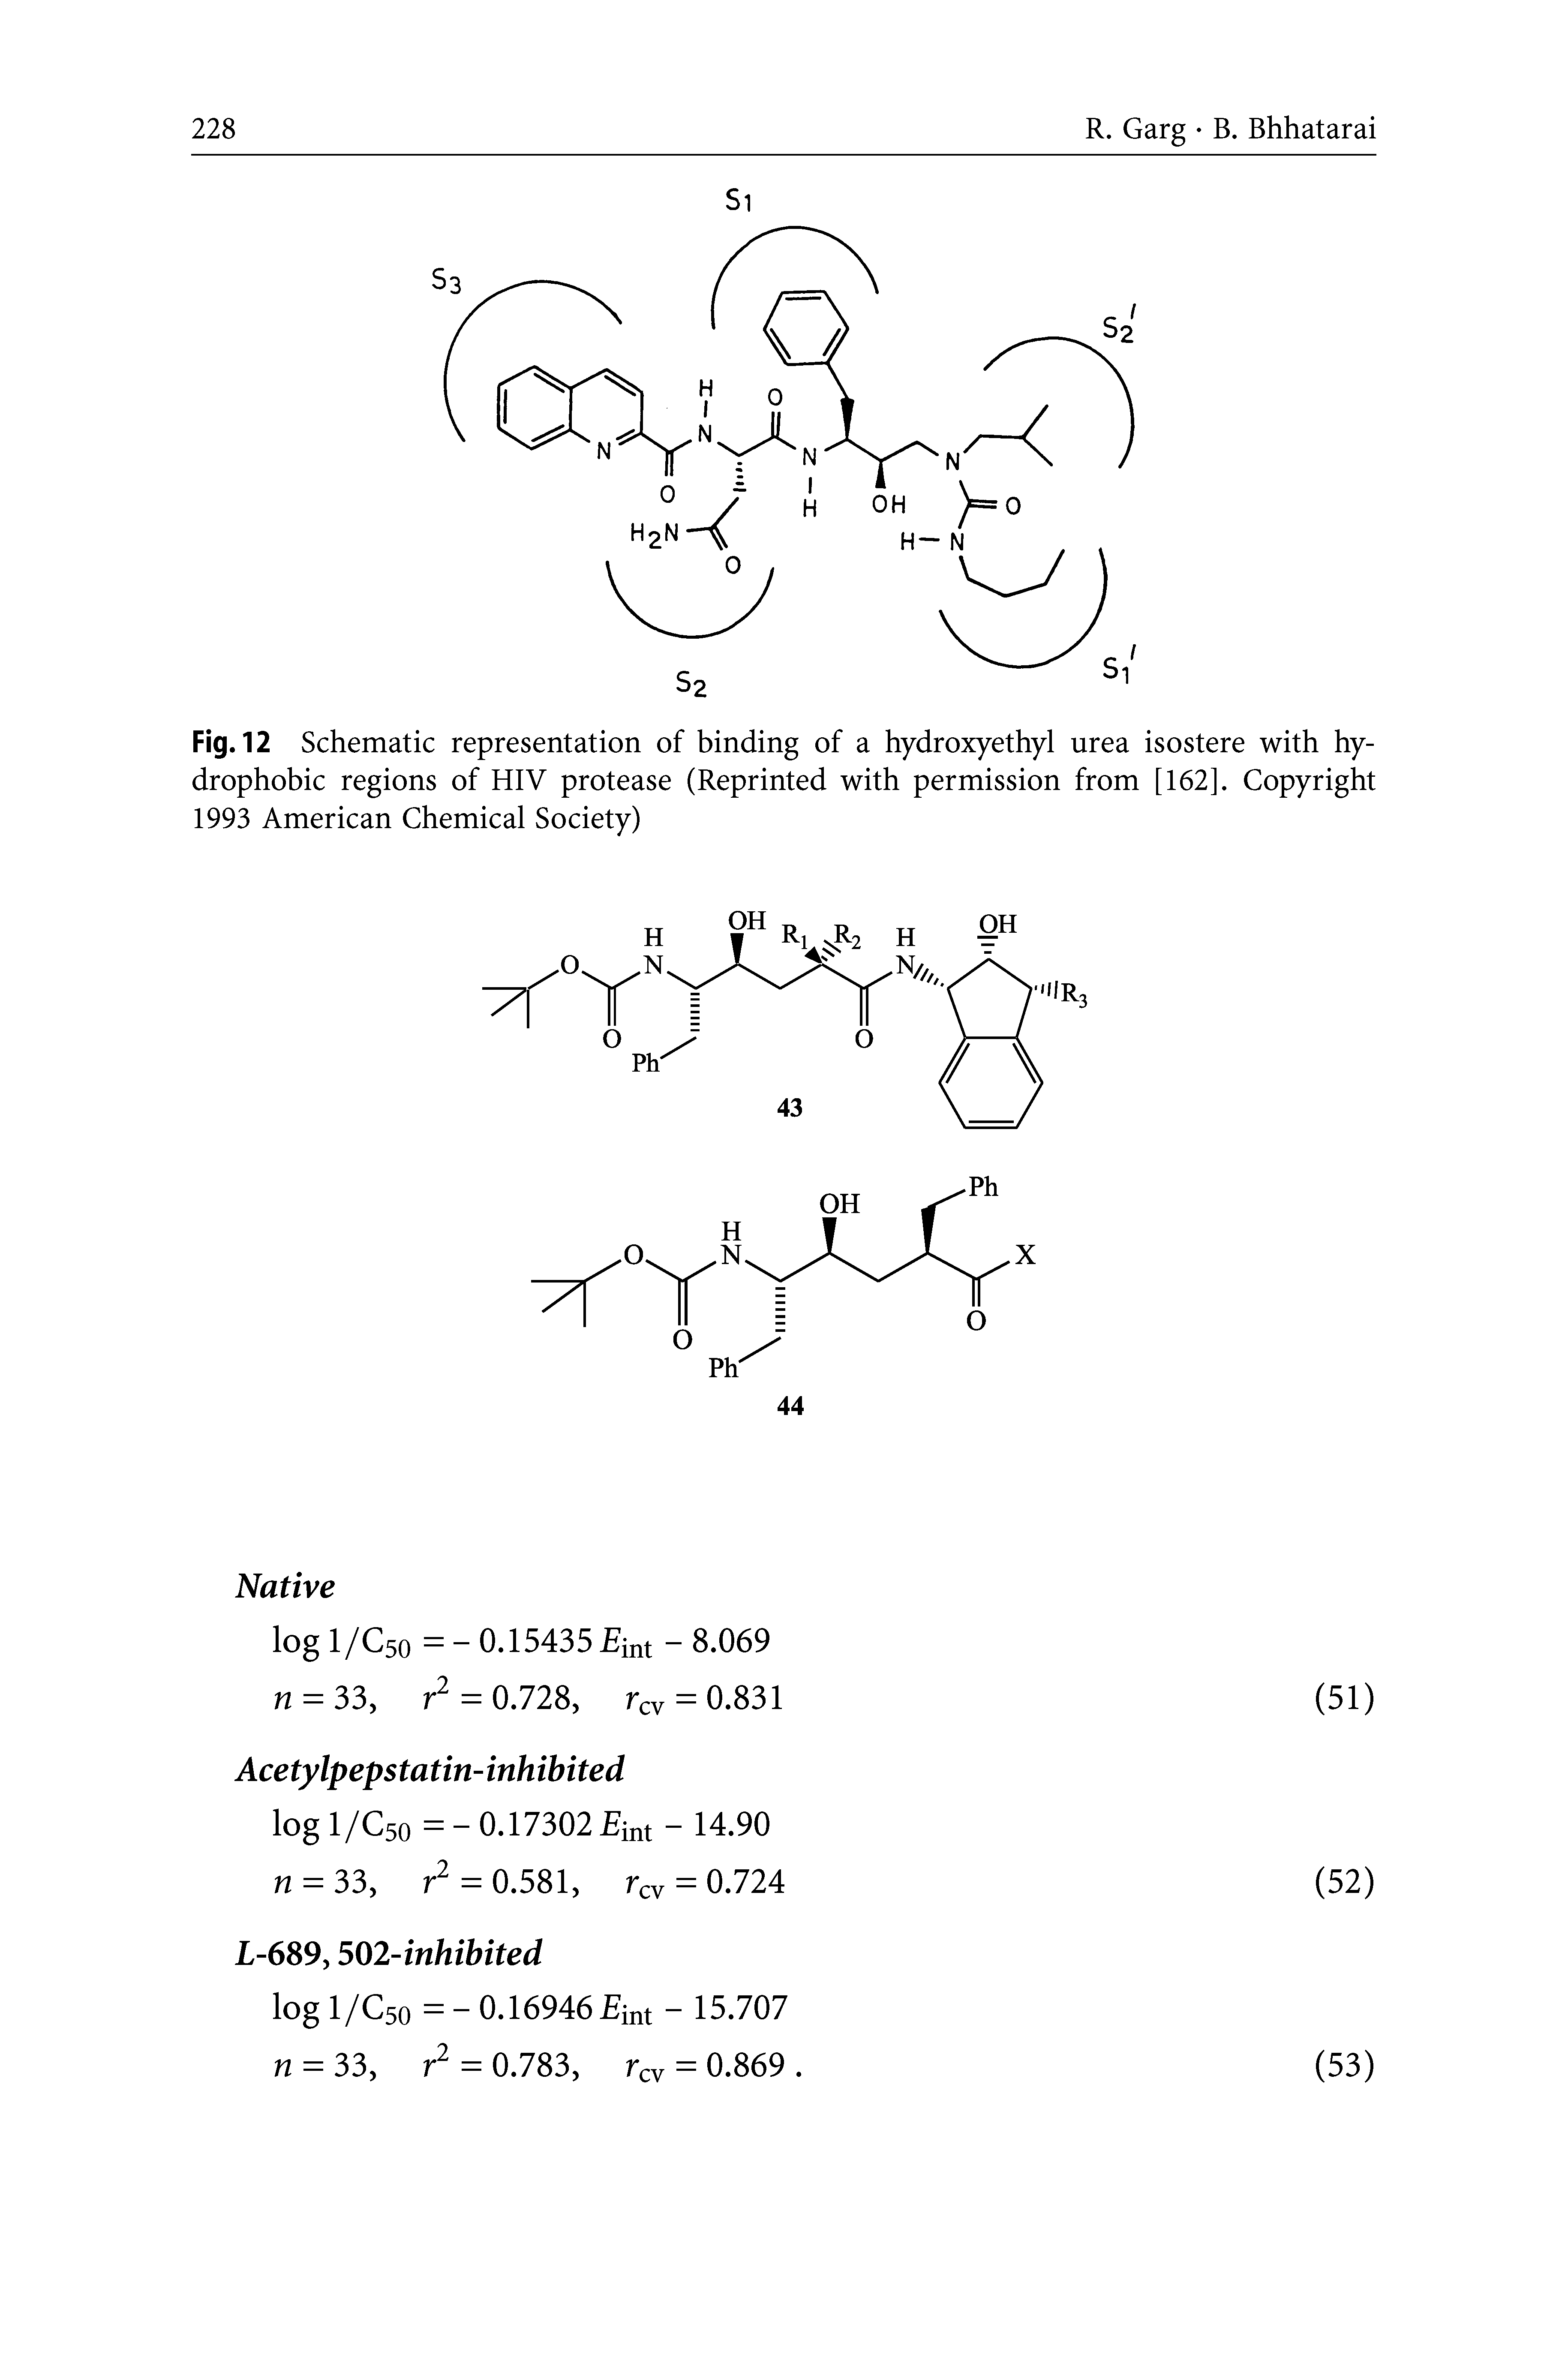 Fig. 12 Schematic representation of binding of a hydroxyethyl urea isostere with hydrophobic regions of HIV protease (Reprinted with permission from [162]. Copyright 1993 American Chemical Society)...